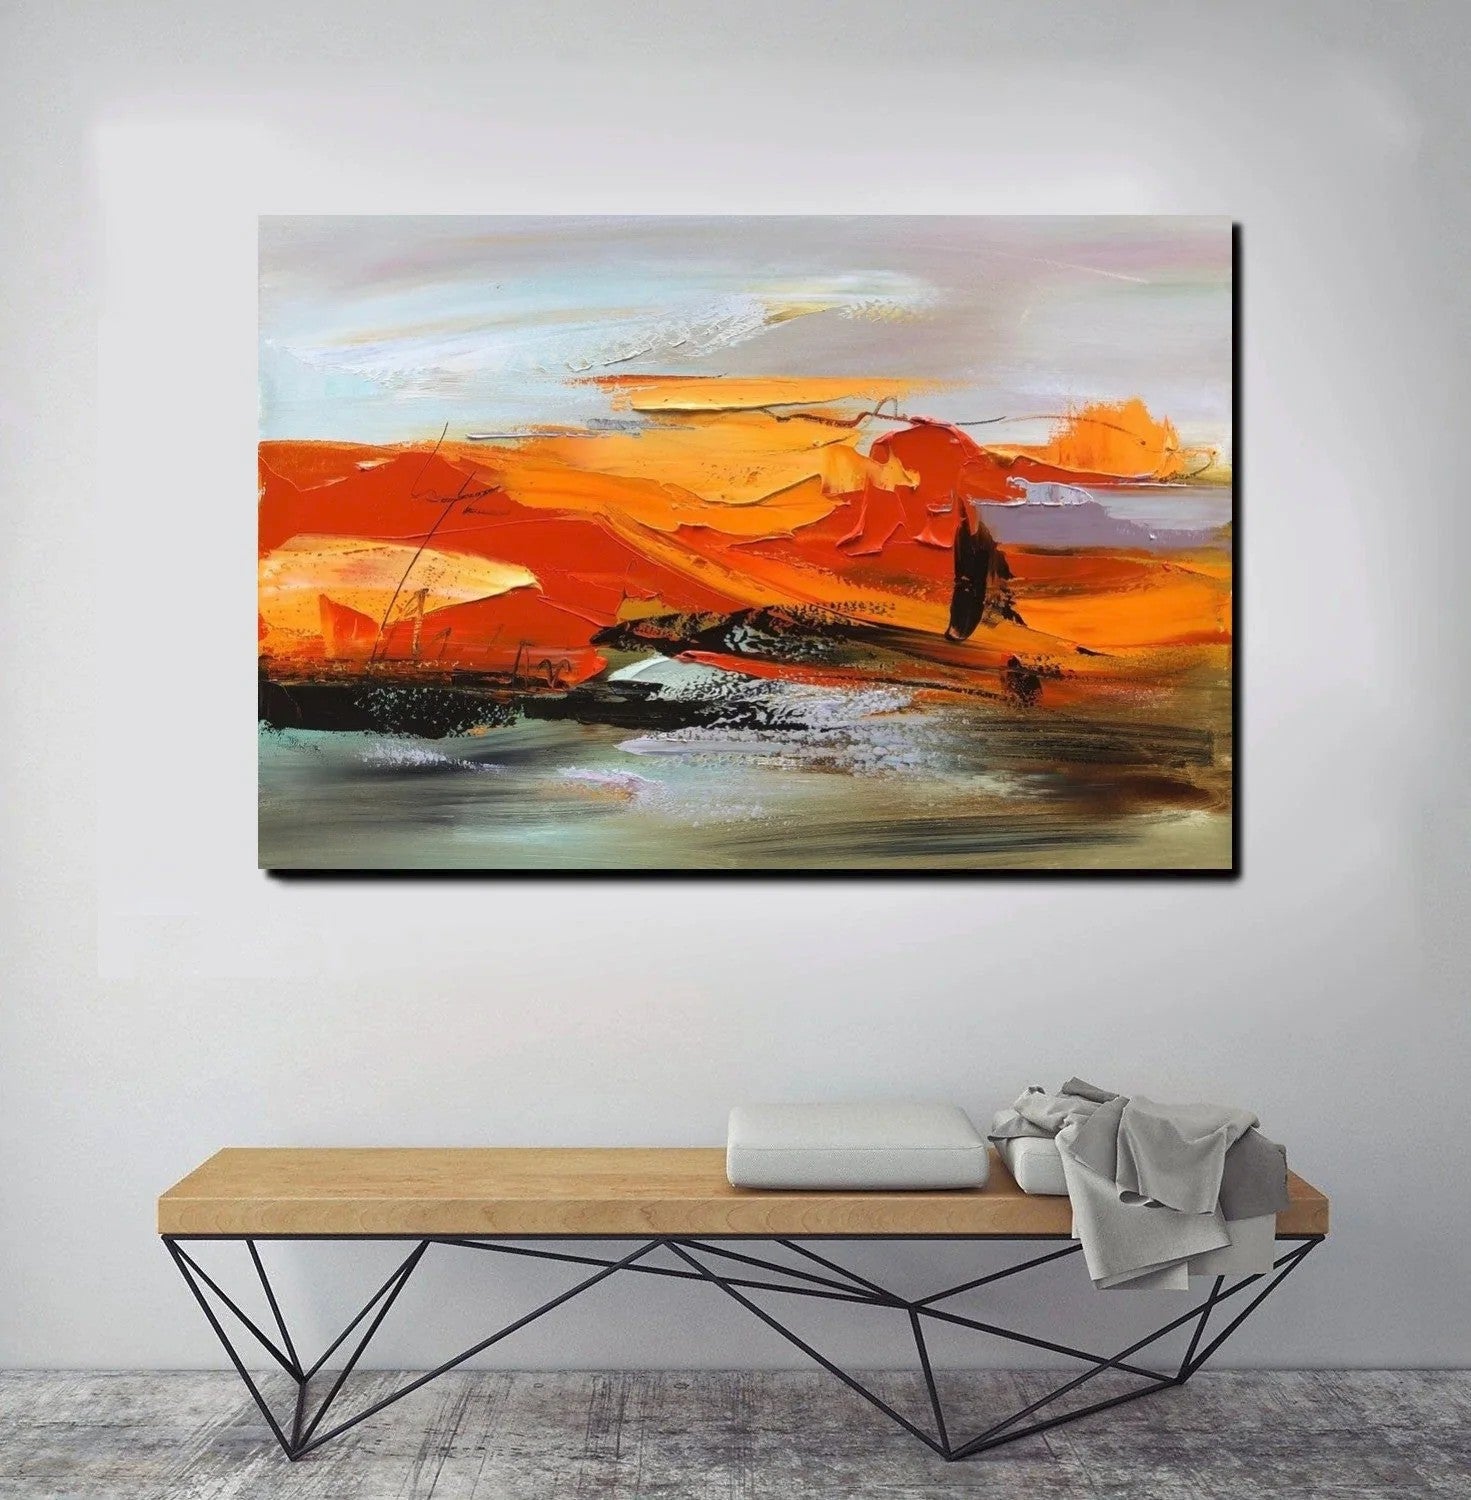 Acrylic Paintings on Canvas, Large Paintings Behind Sofa, Large Painting for Living Room, Heavy Texture Painting, Buy Paintings Online